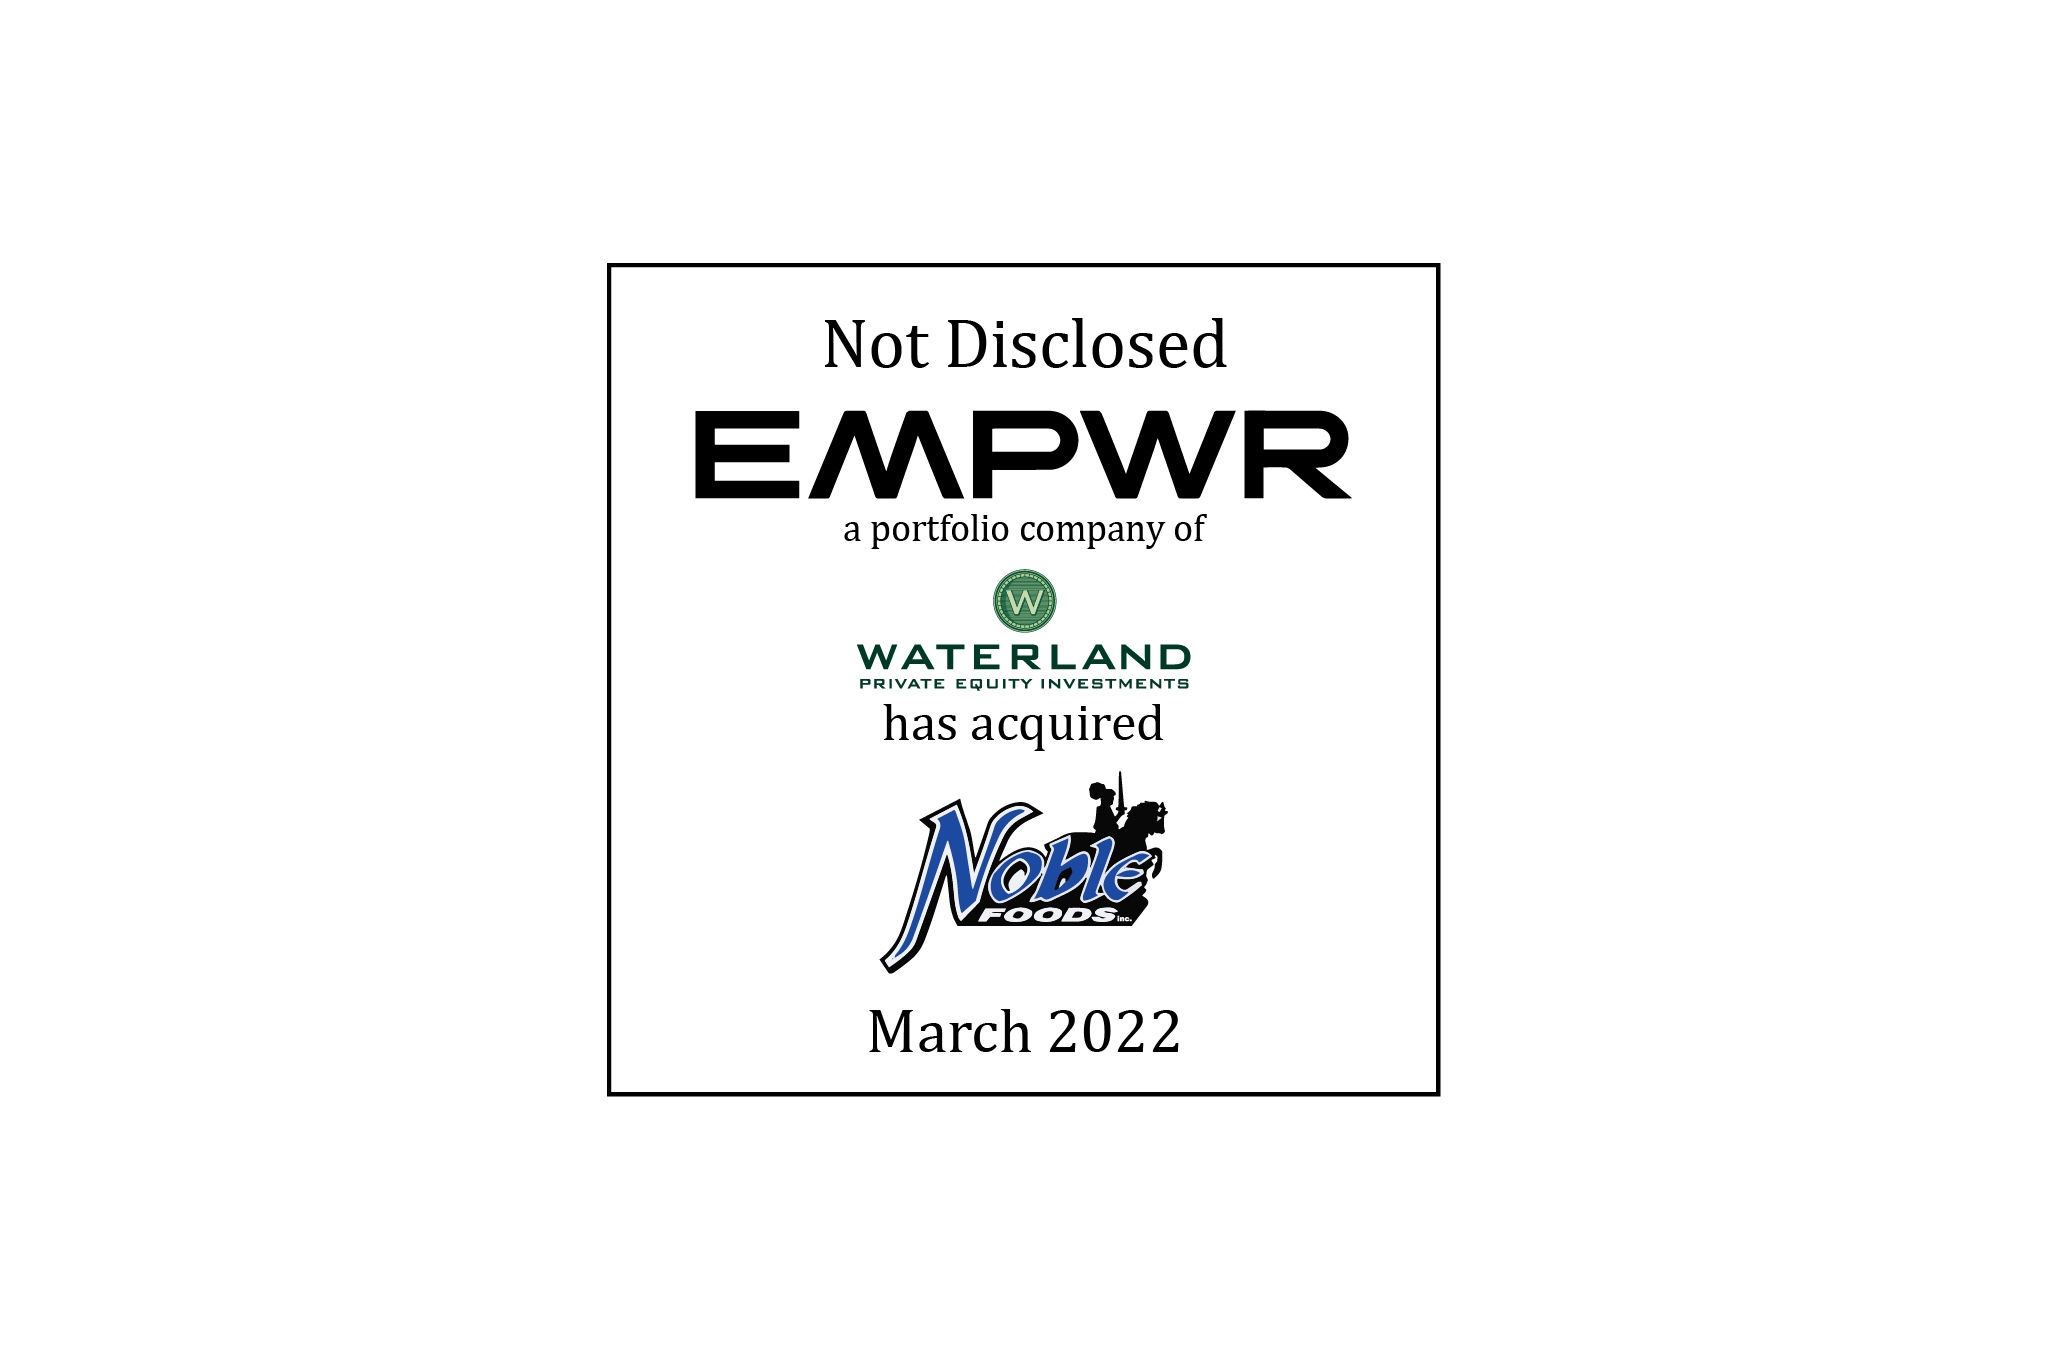 EMPWR Has Acquired Noble Foods